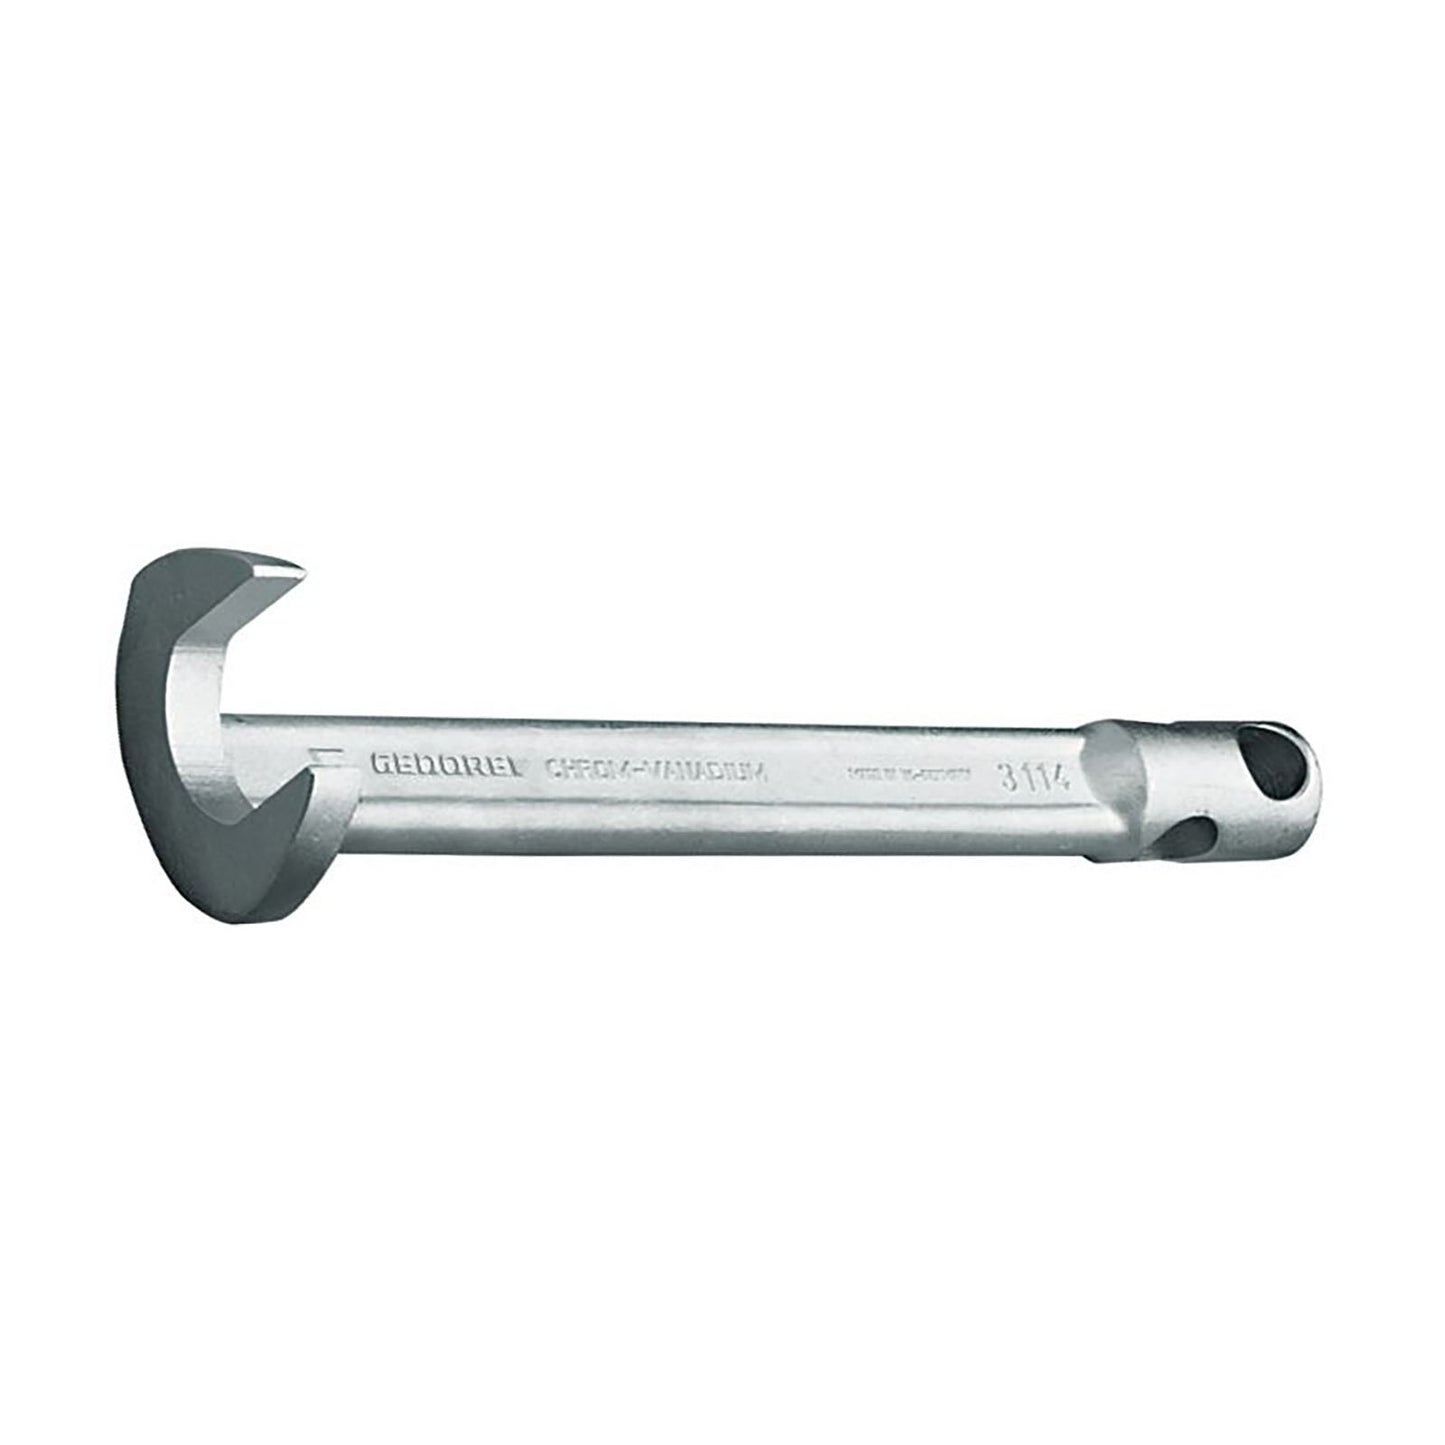 GEDORE 3114 18 - Forked Foot Wrench, 18mm (6677060)